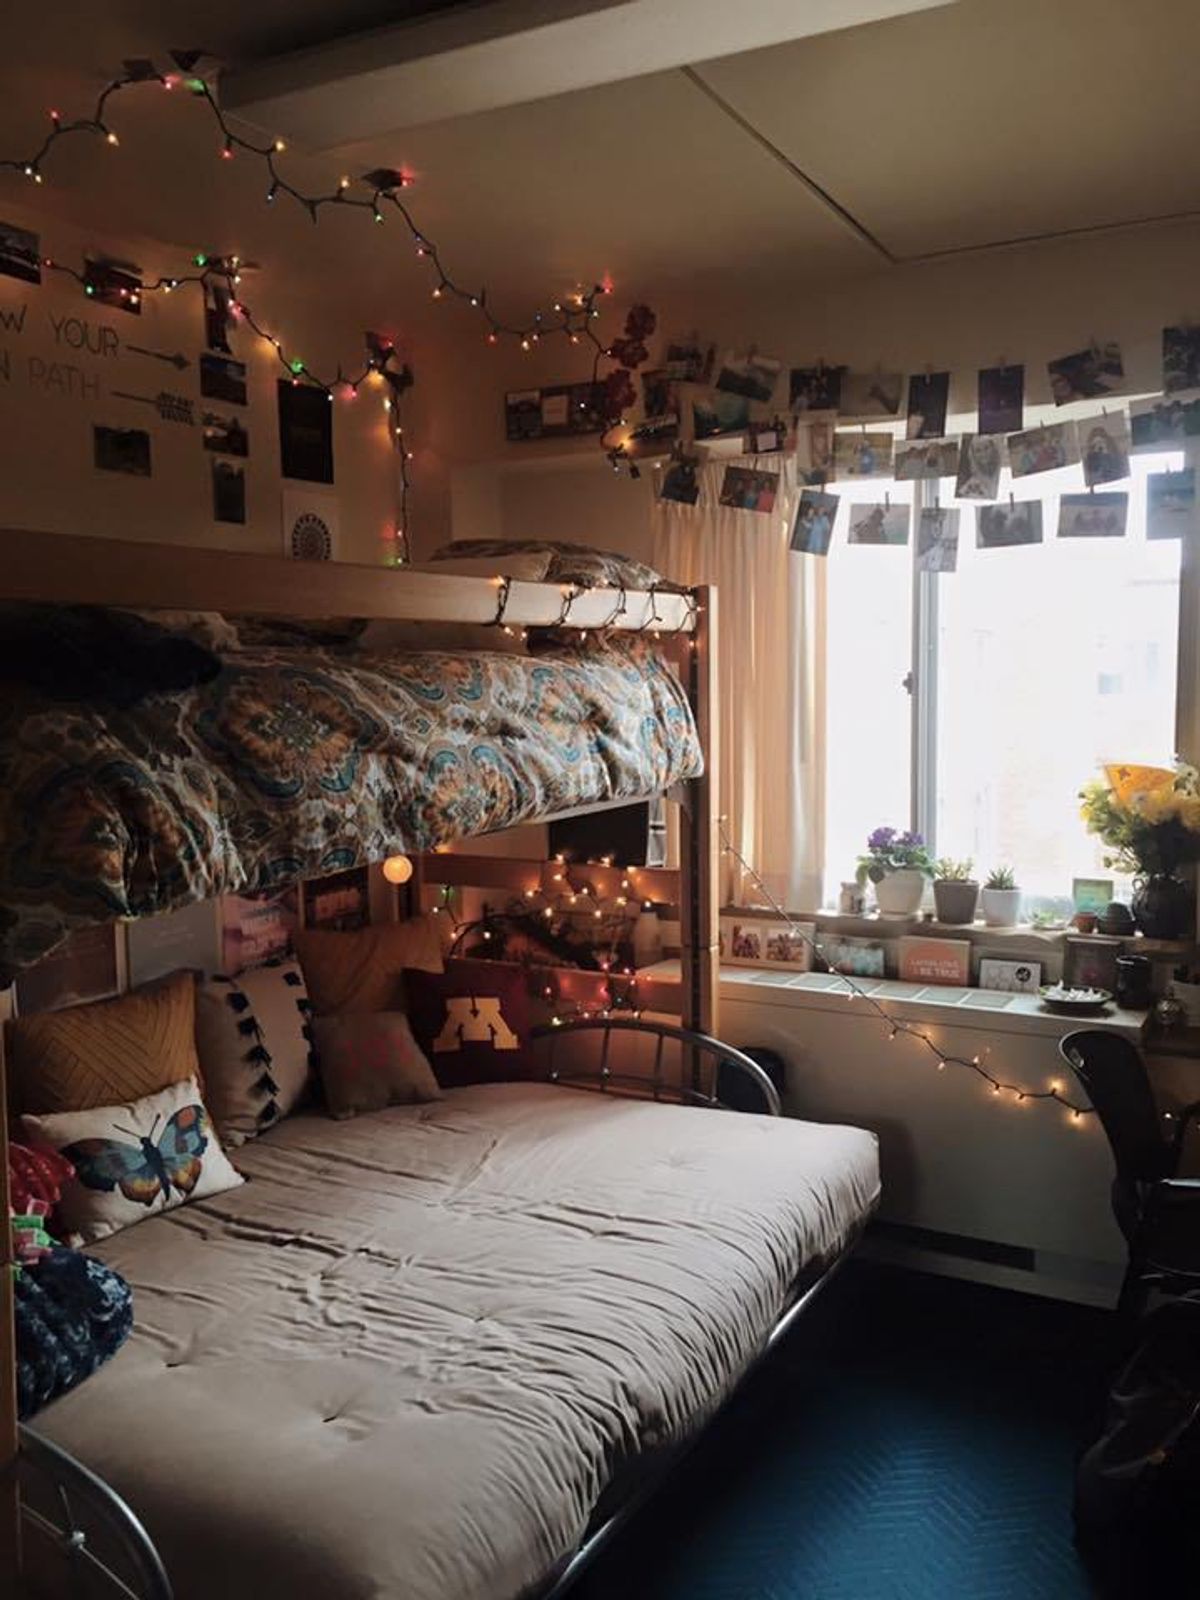 12 Ways to Spruce Up Your Dorm Room